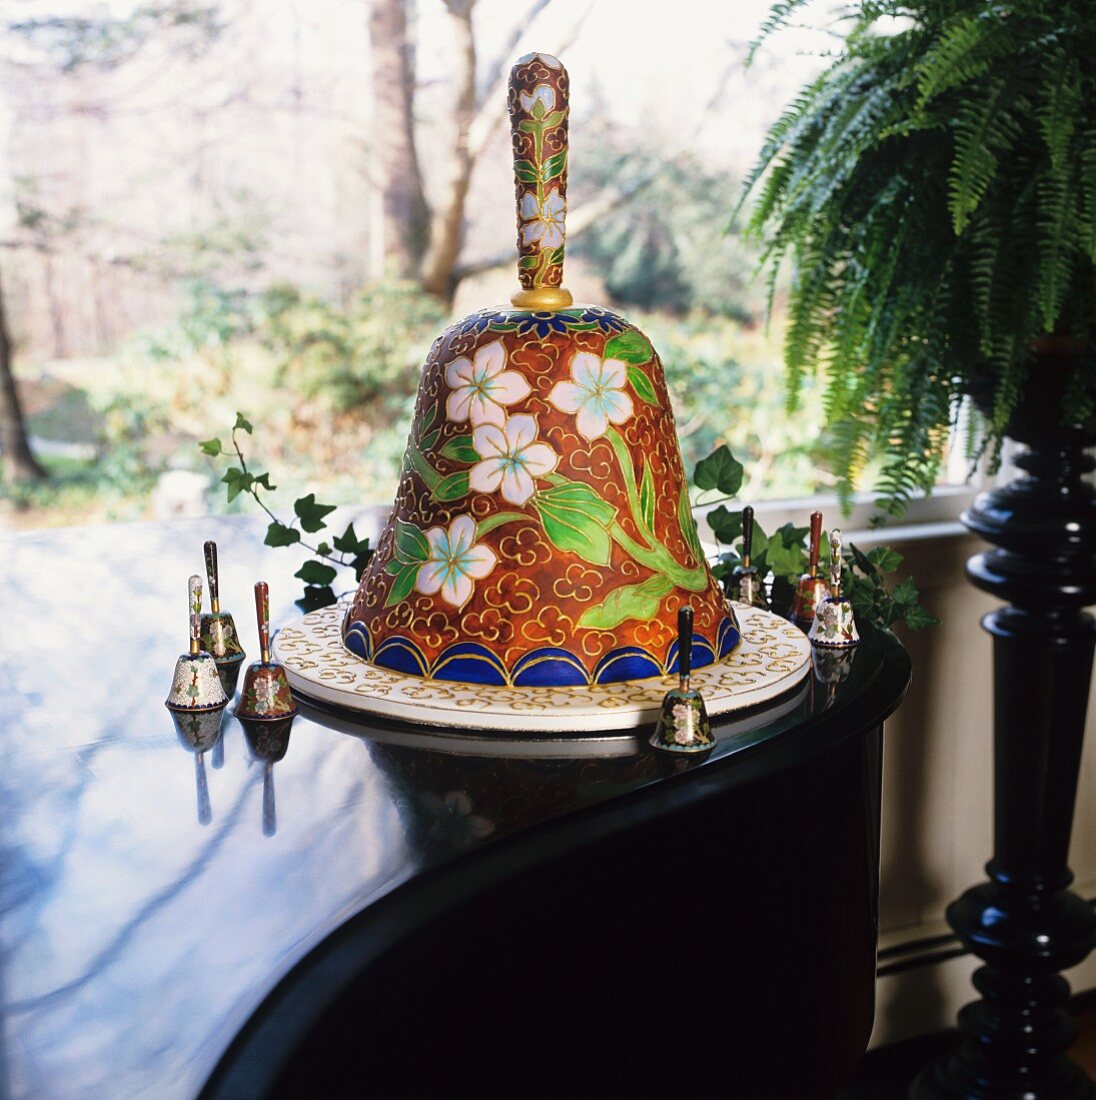 Wedding Bell Cake on a Platter Surrounded by Wedding Bells